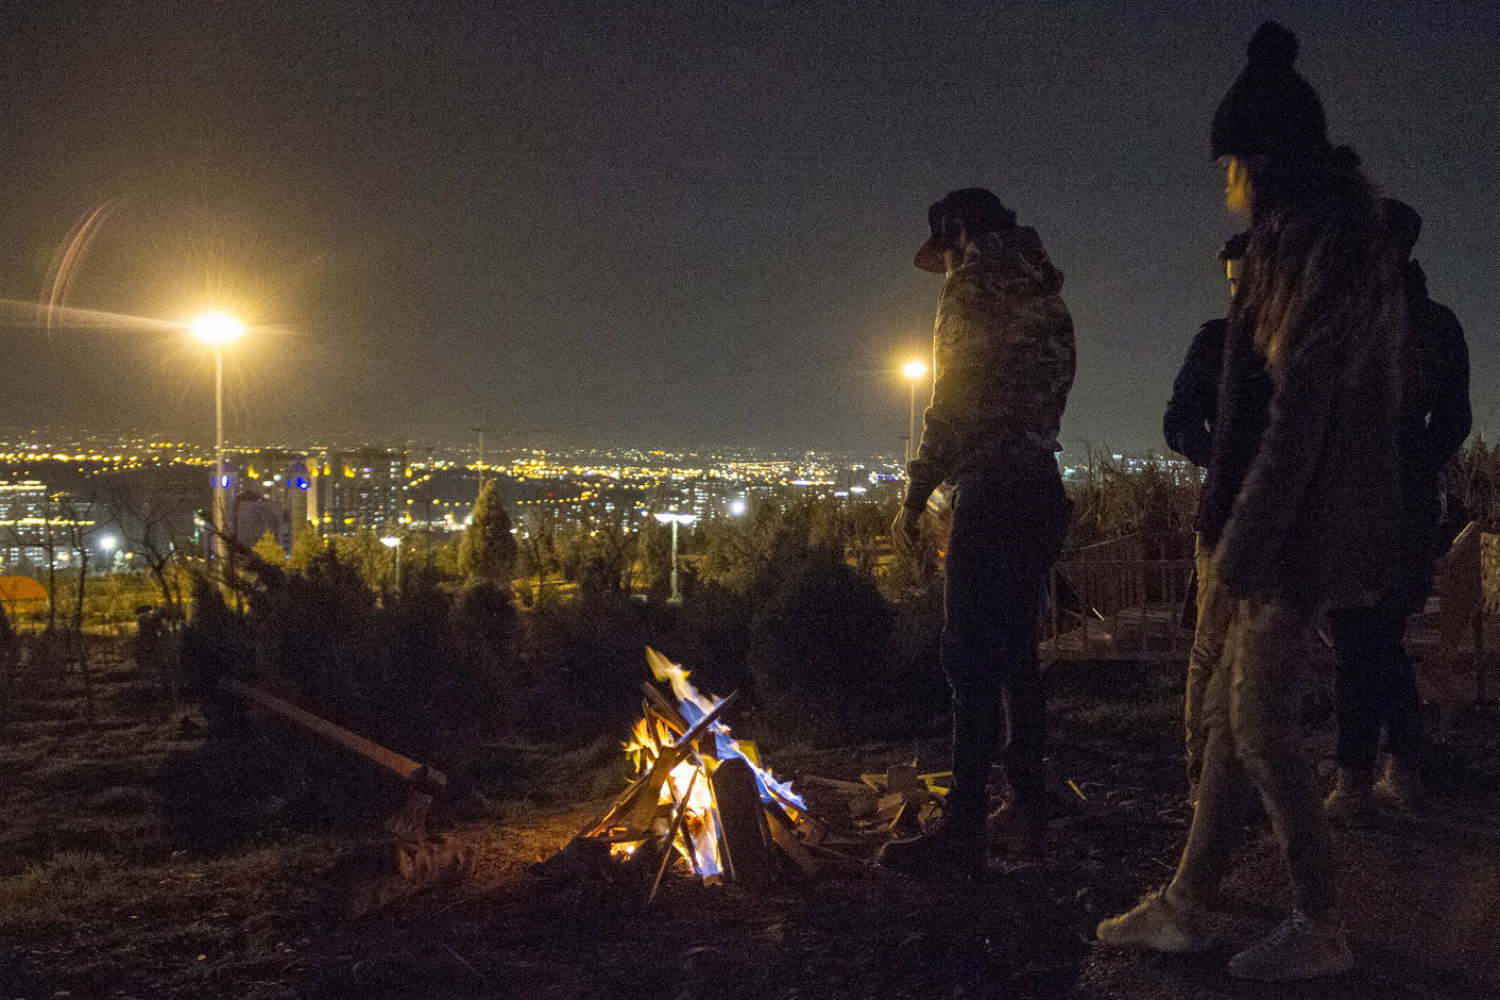 In the north-west in Abshar, at the foot of the mountains, small groups of young men and women hang around campfires near the Tehran Waterfall Park. (MEE)